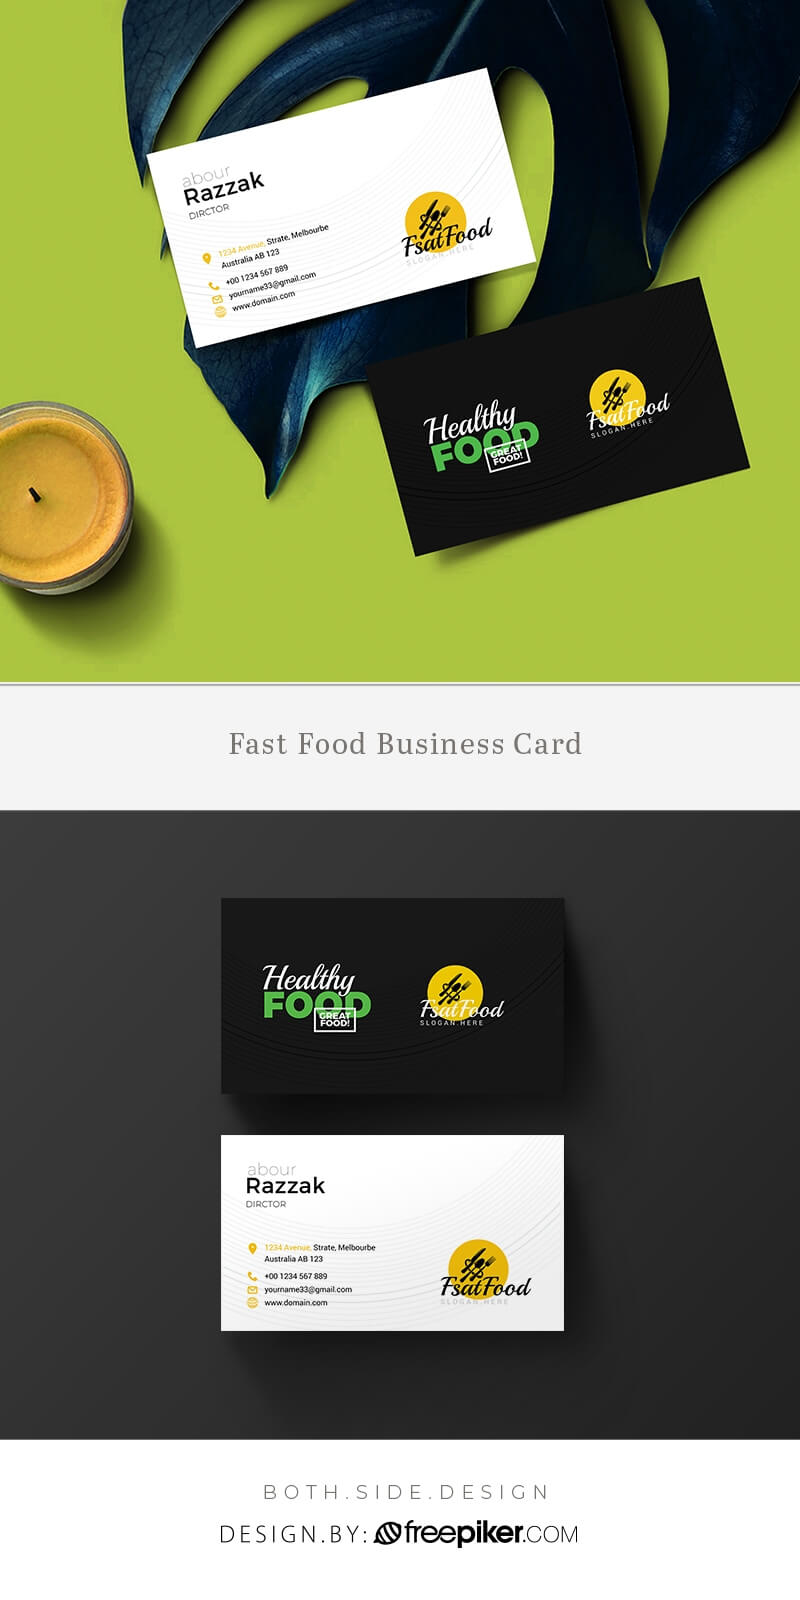 Freepiker | Food And Restaurant Business Card Template Pertaining To Food Business Cards Templates Free